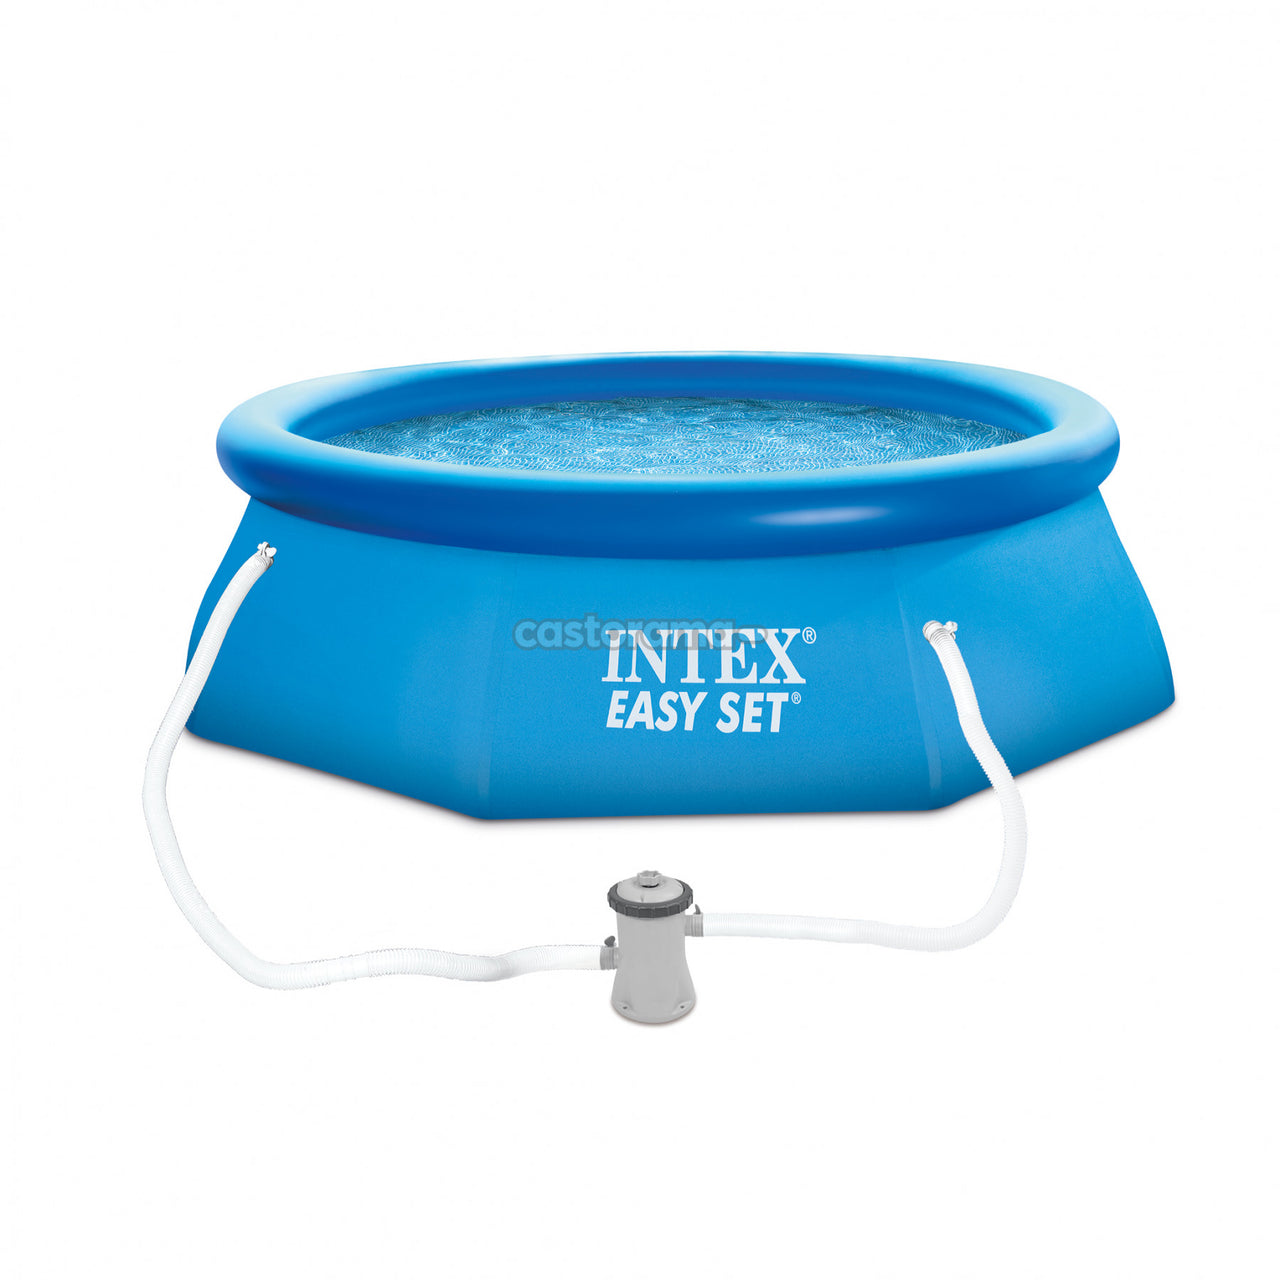 intex 28122 10ftx30 easy set swimming pool with filter pump